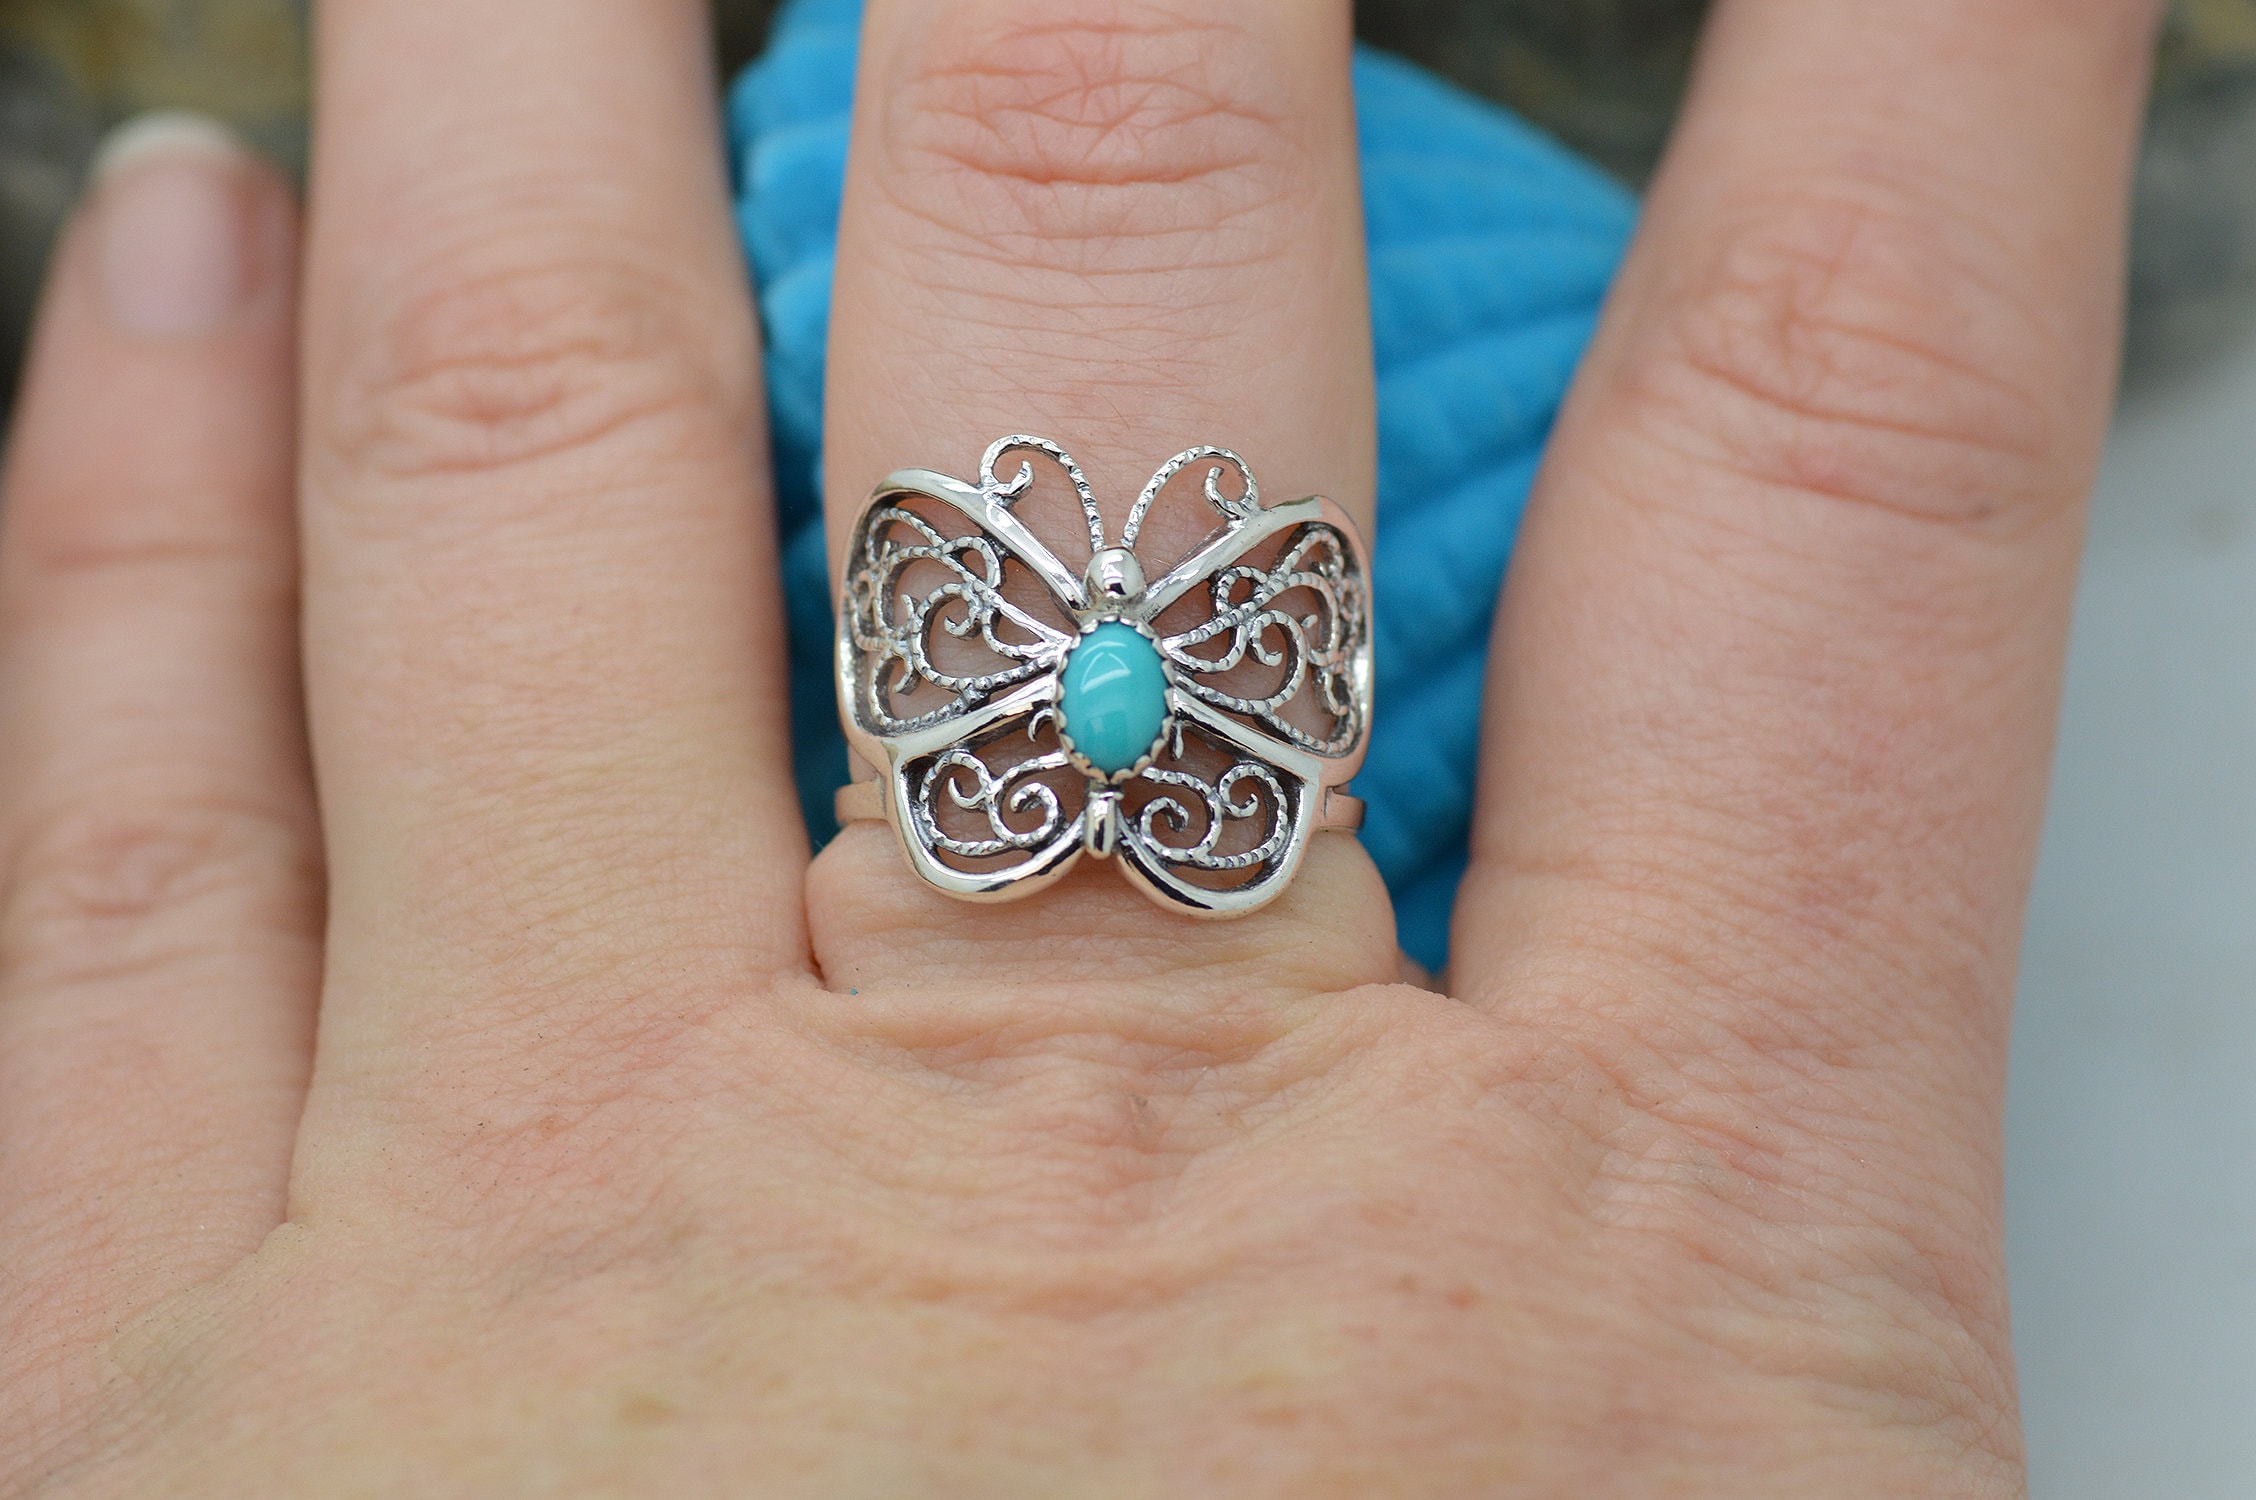 Details about   925 STERLING SILVER ARTISAN FILIGREE ANGEL BUTTERFLY RING SIZE 8 